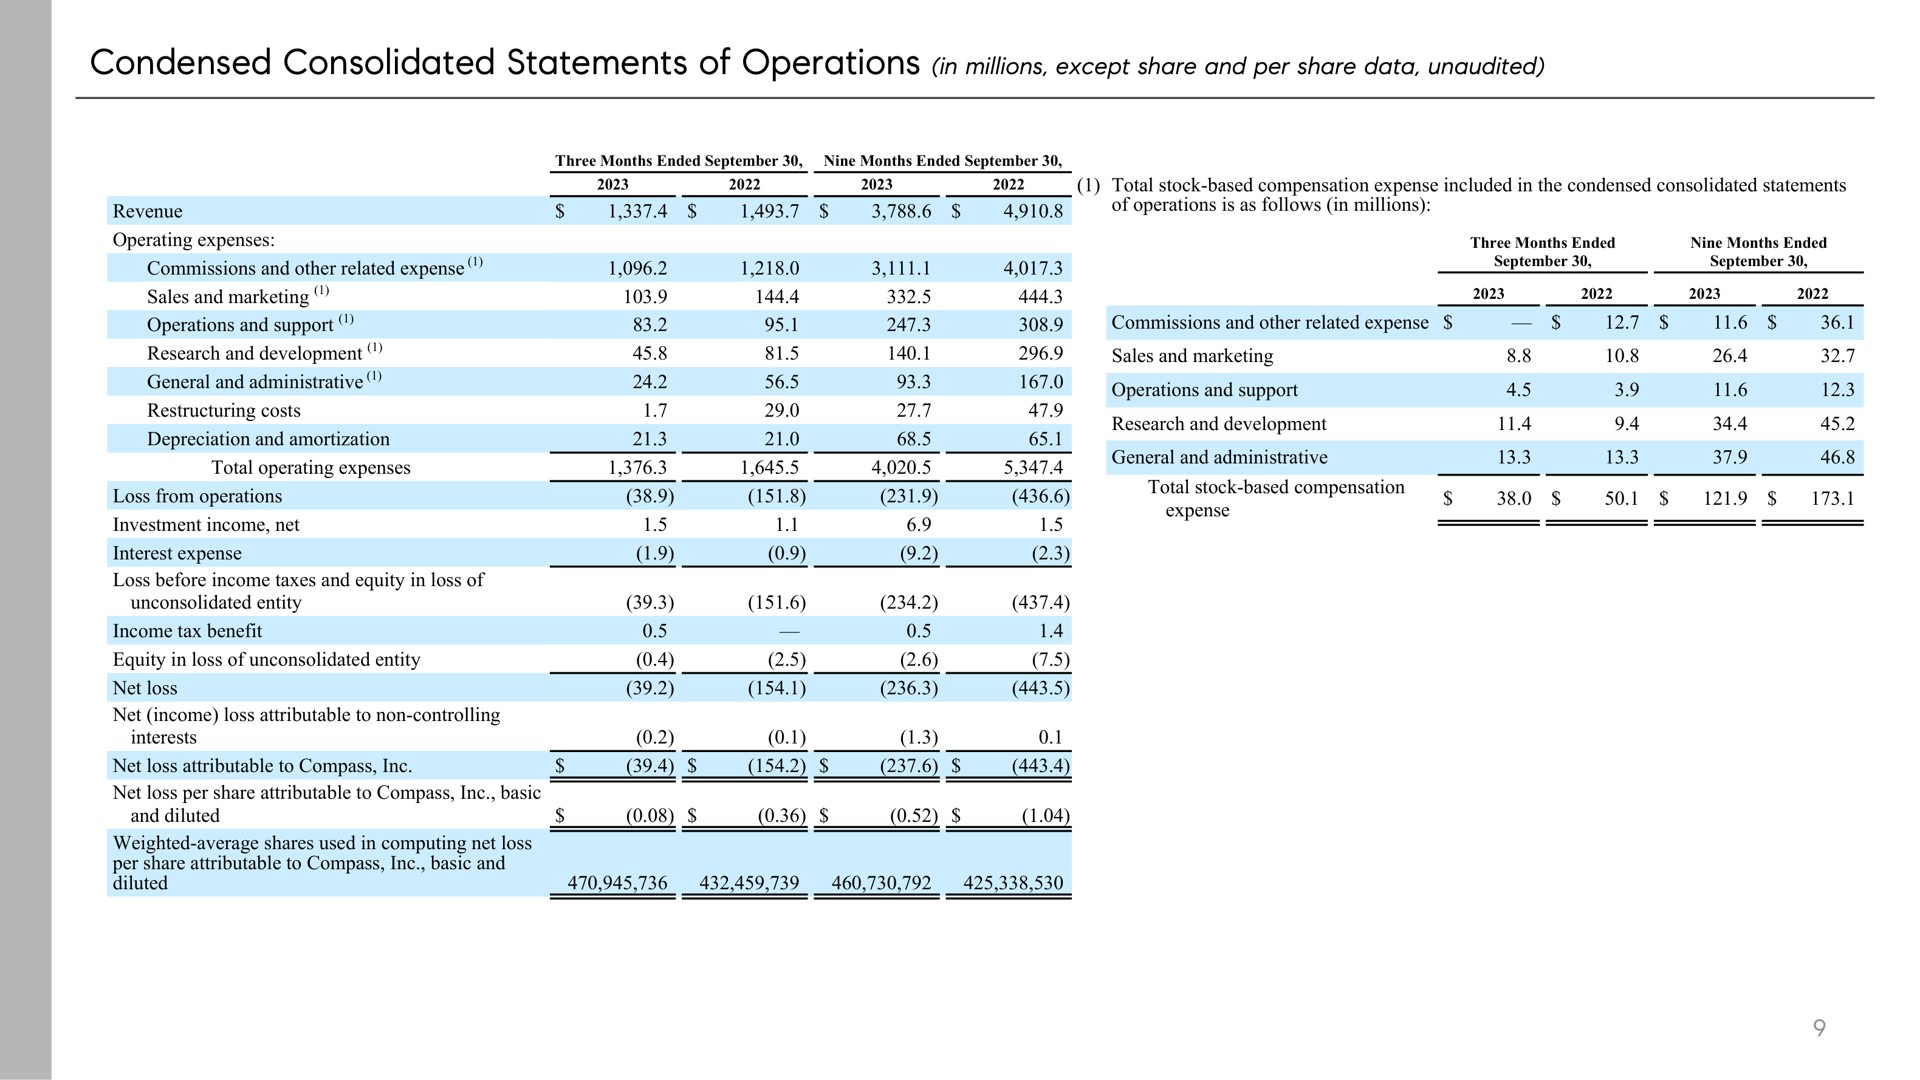 loss from operations a research total stock based compensation | Compass